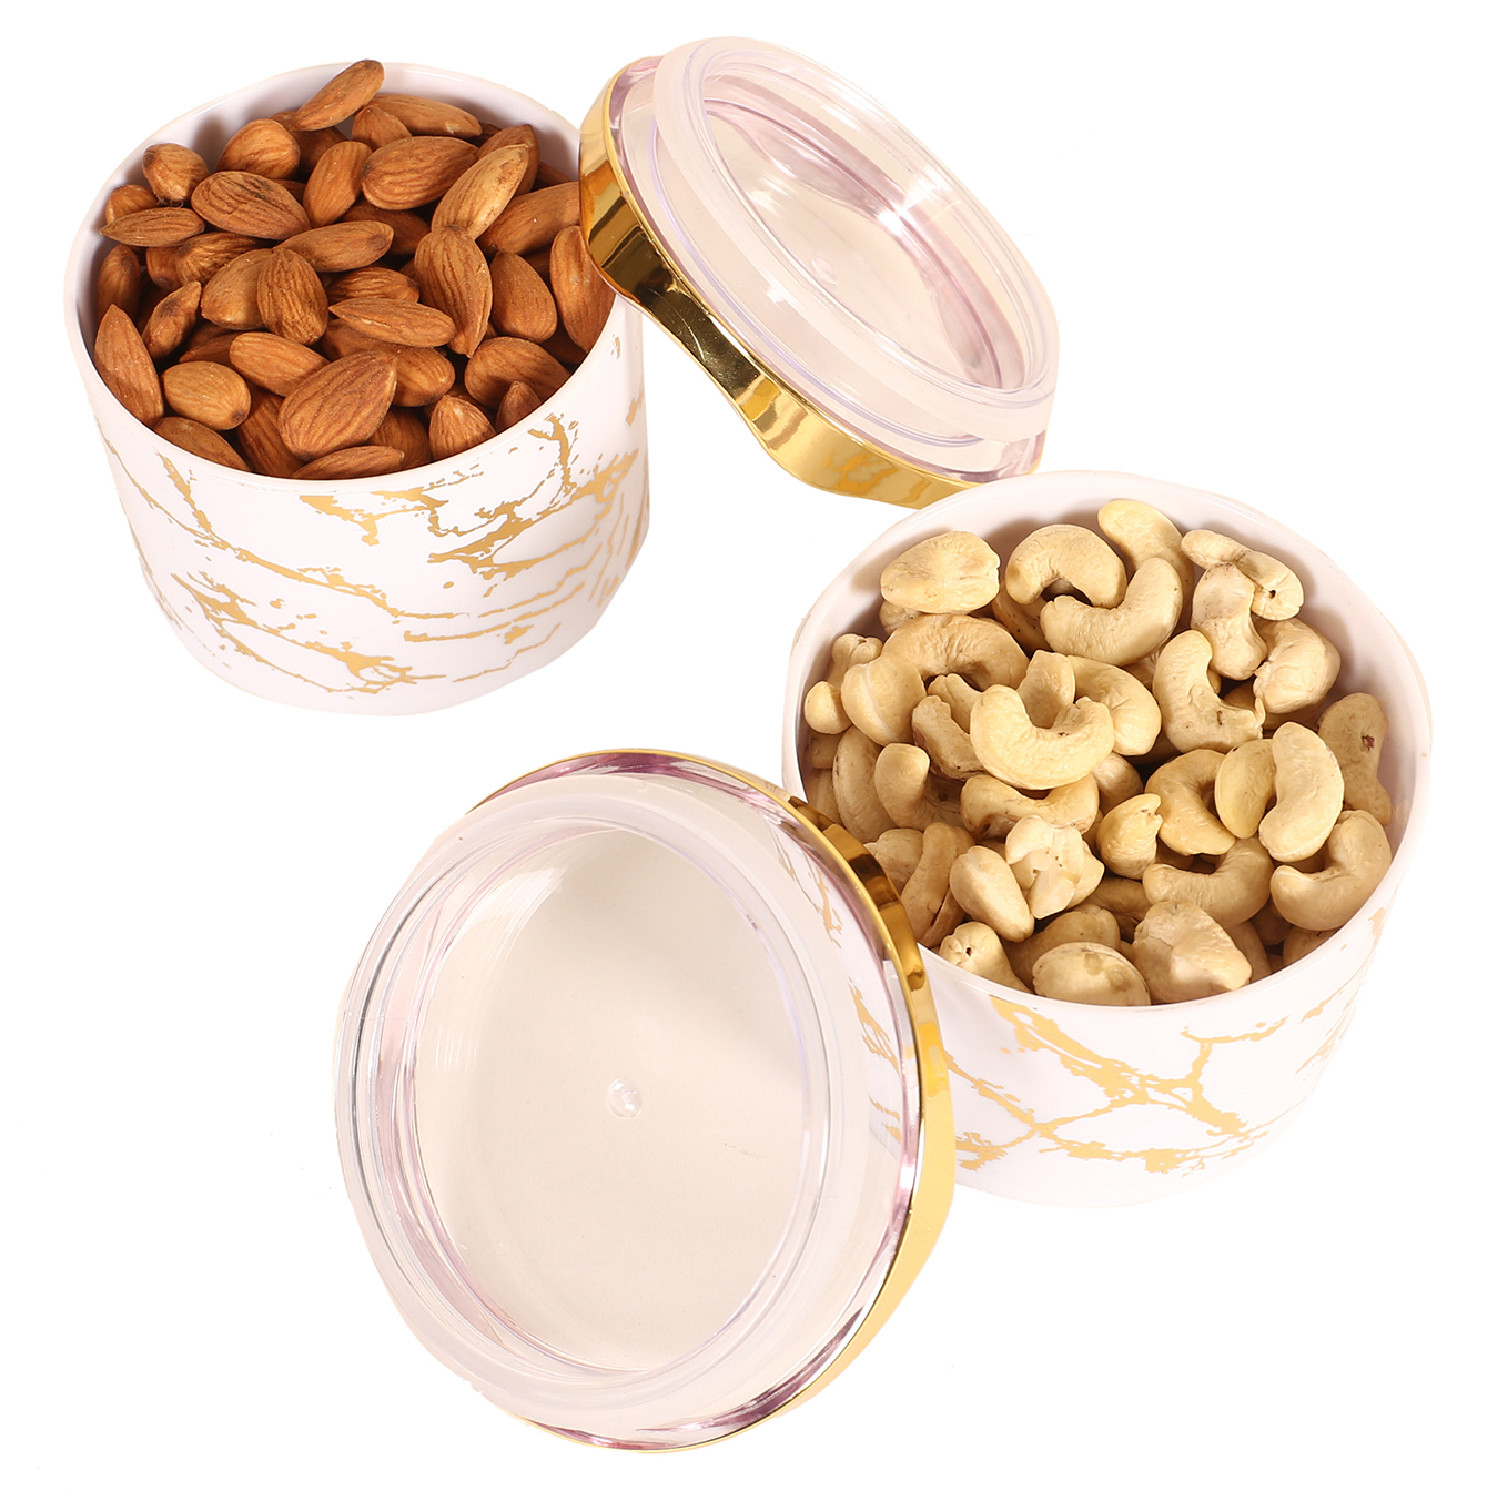 Kuber Industries 2 Bowls Set|Unbreakable Plastic Snackers,Cookies,Nuts Serving Containers|Airtight Jar with Lid,350 ml (White)